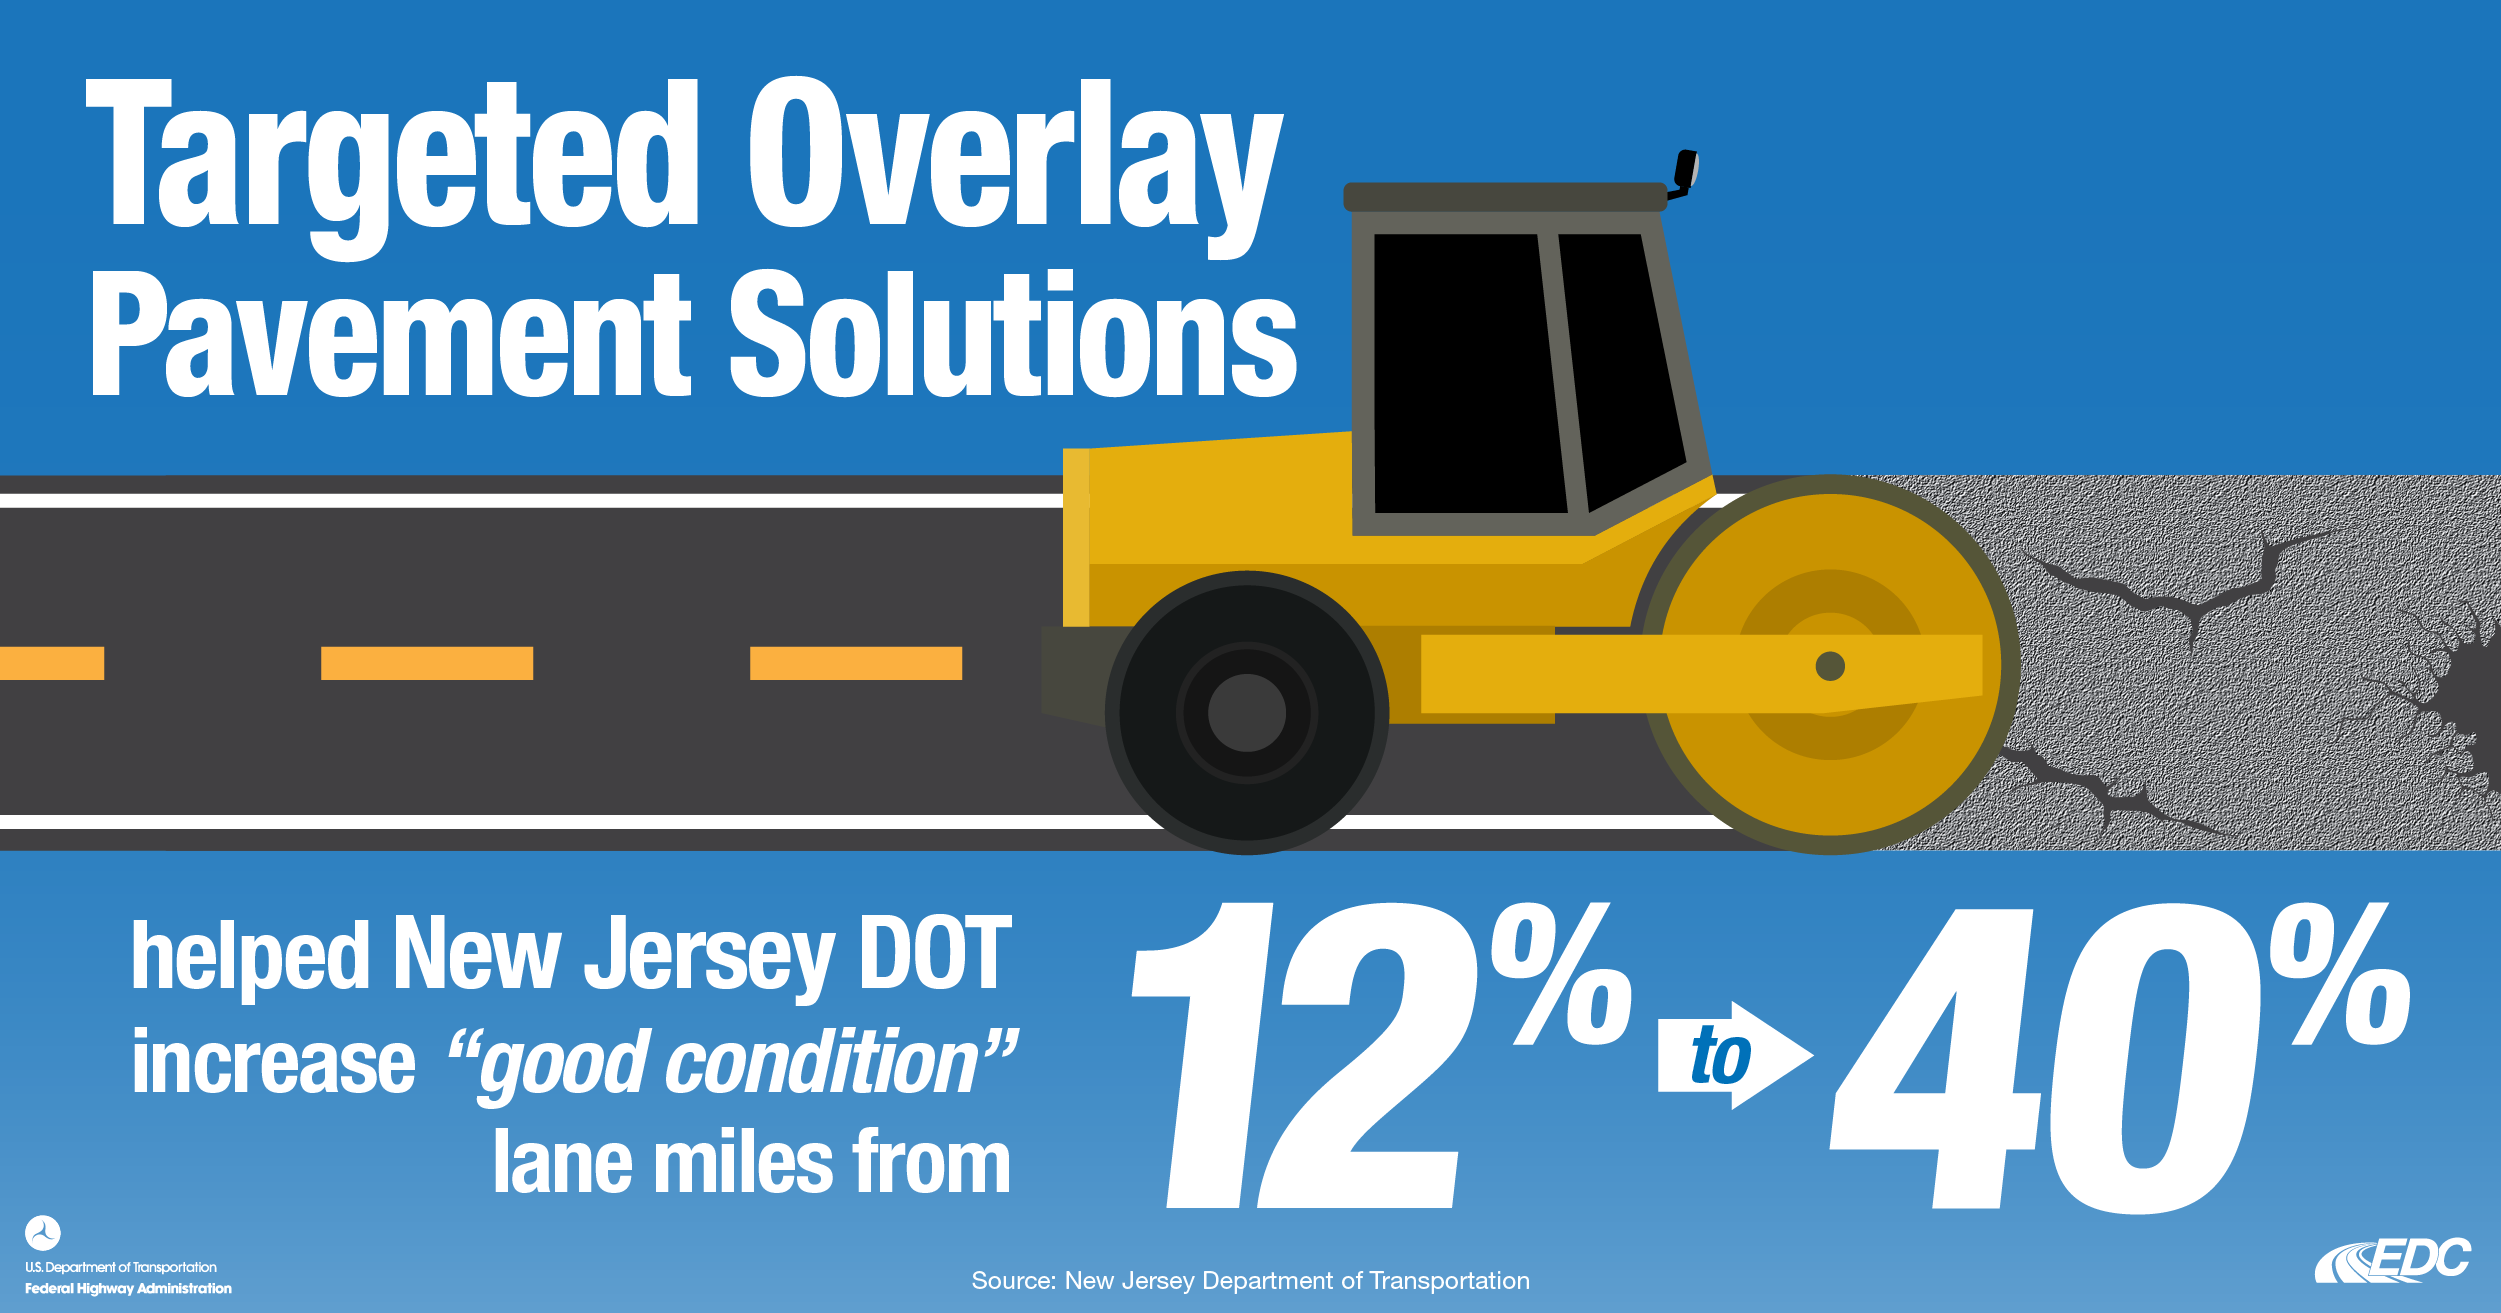 Targeted overlay pavement solutions helped the New Jersey Department of Transportation increase good condition lane miles from 12% to 40%. Source: New Jersey Department of Transportation.